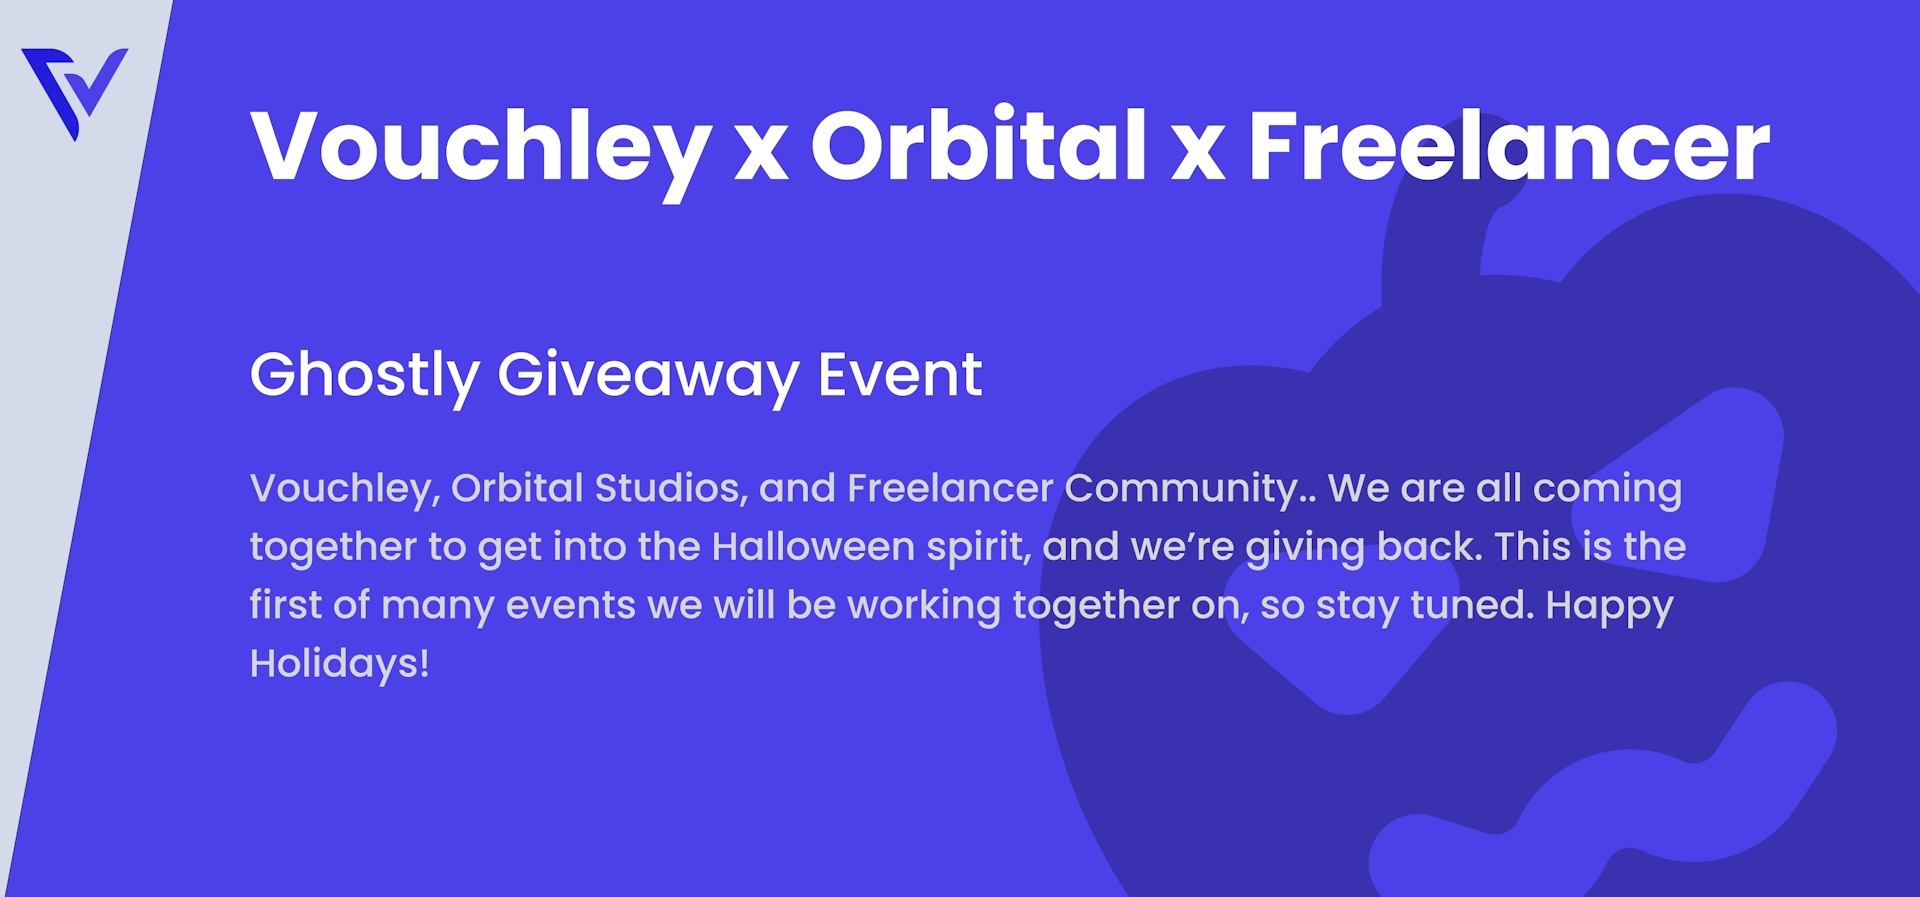 Vouchley x Orbital x Freelancer Ghostly Giveaway Event